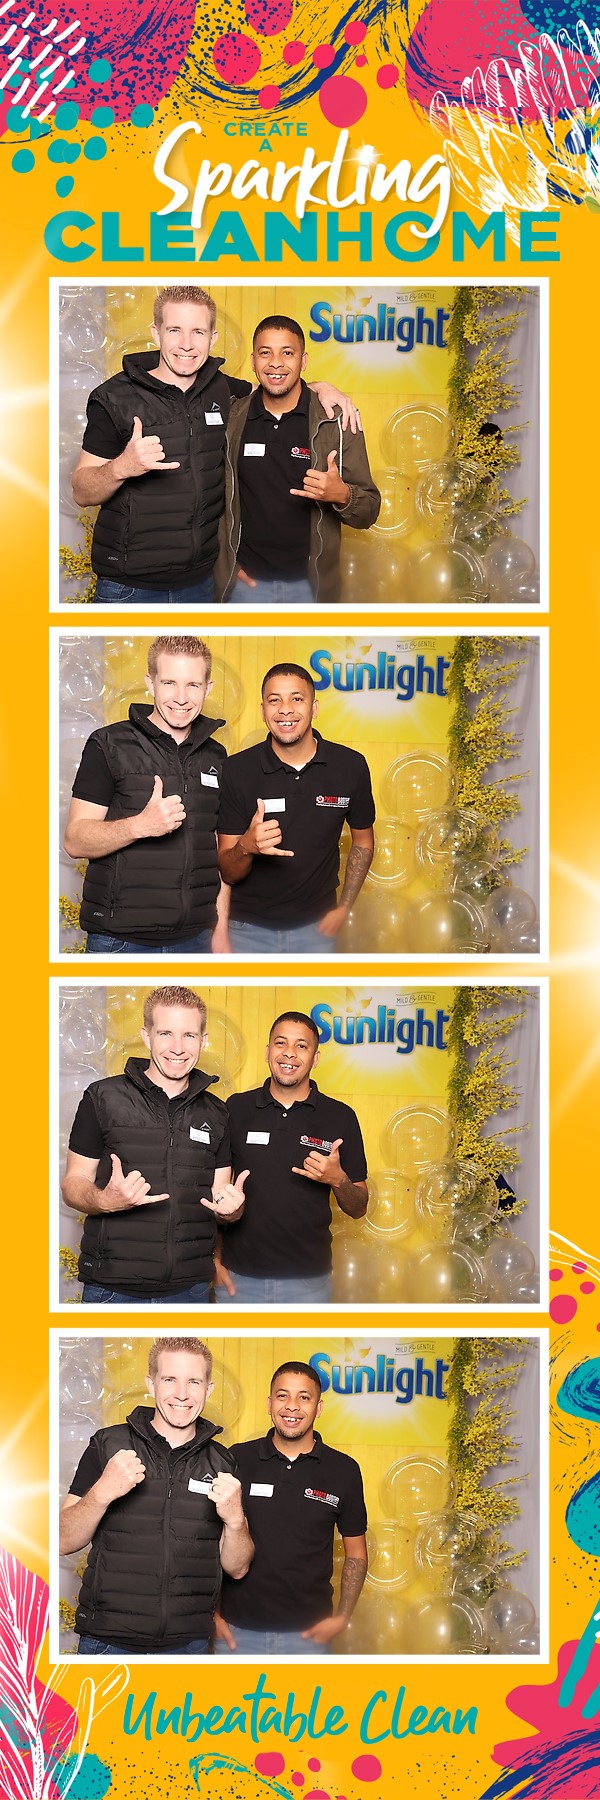 Corporate Photobooths for South African Corporate Companies - Professionally Printed Photos onsite at your Event